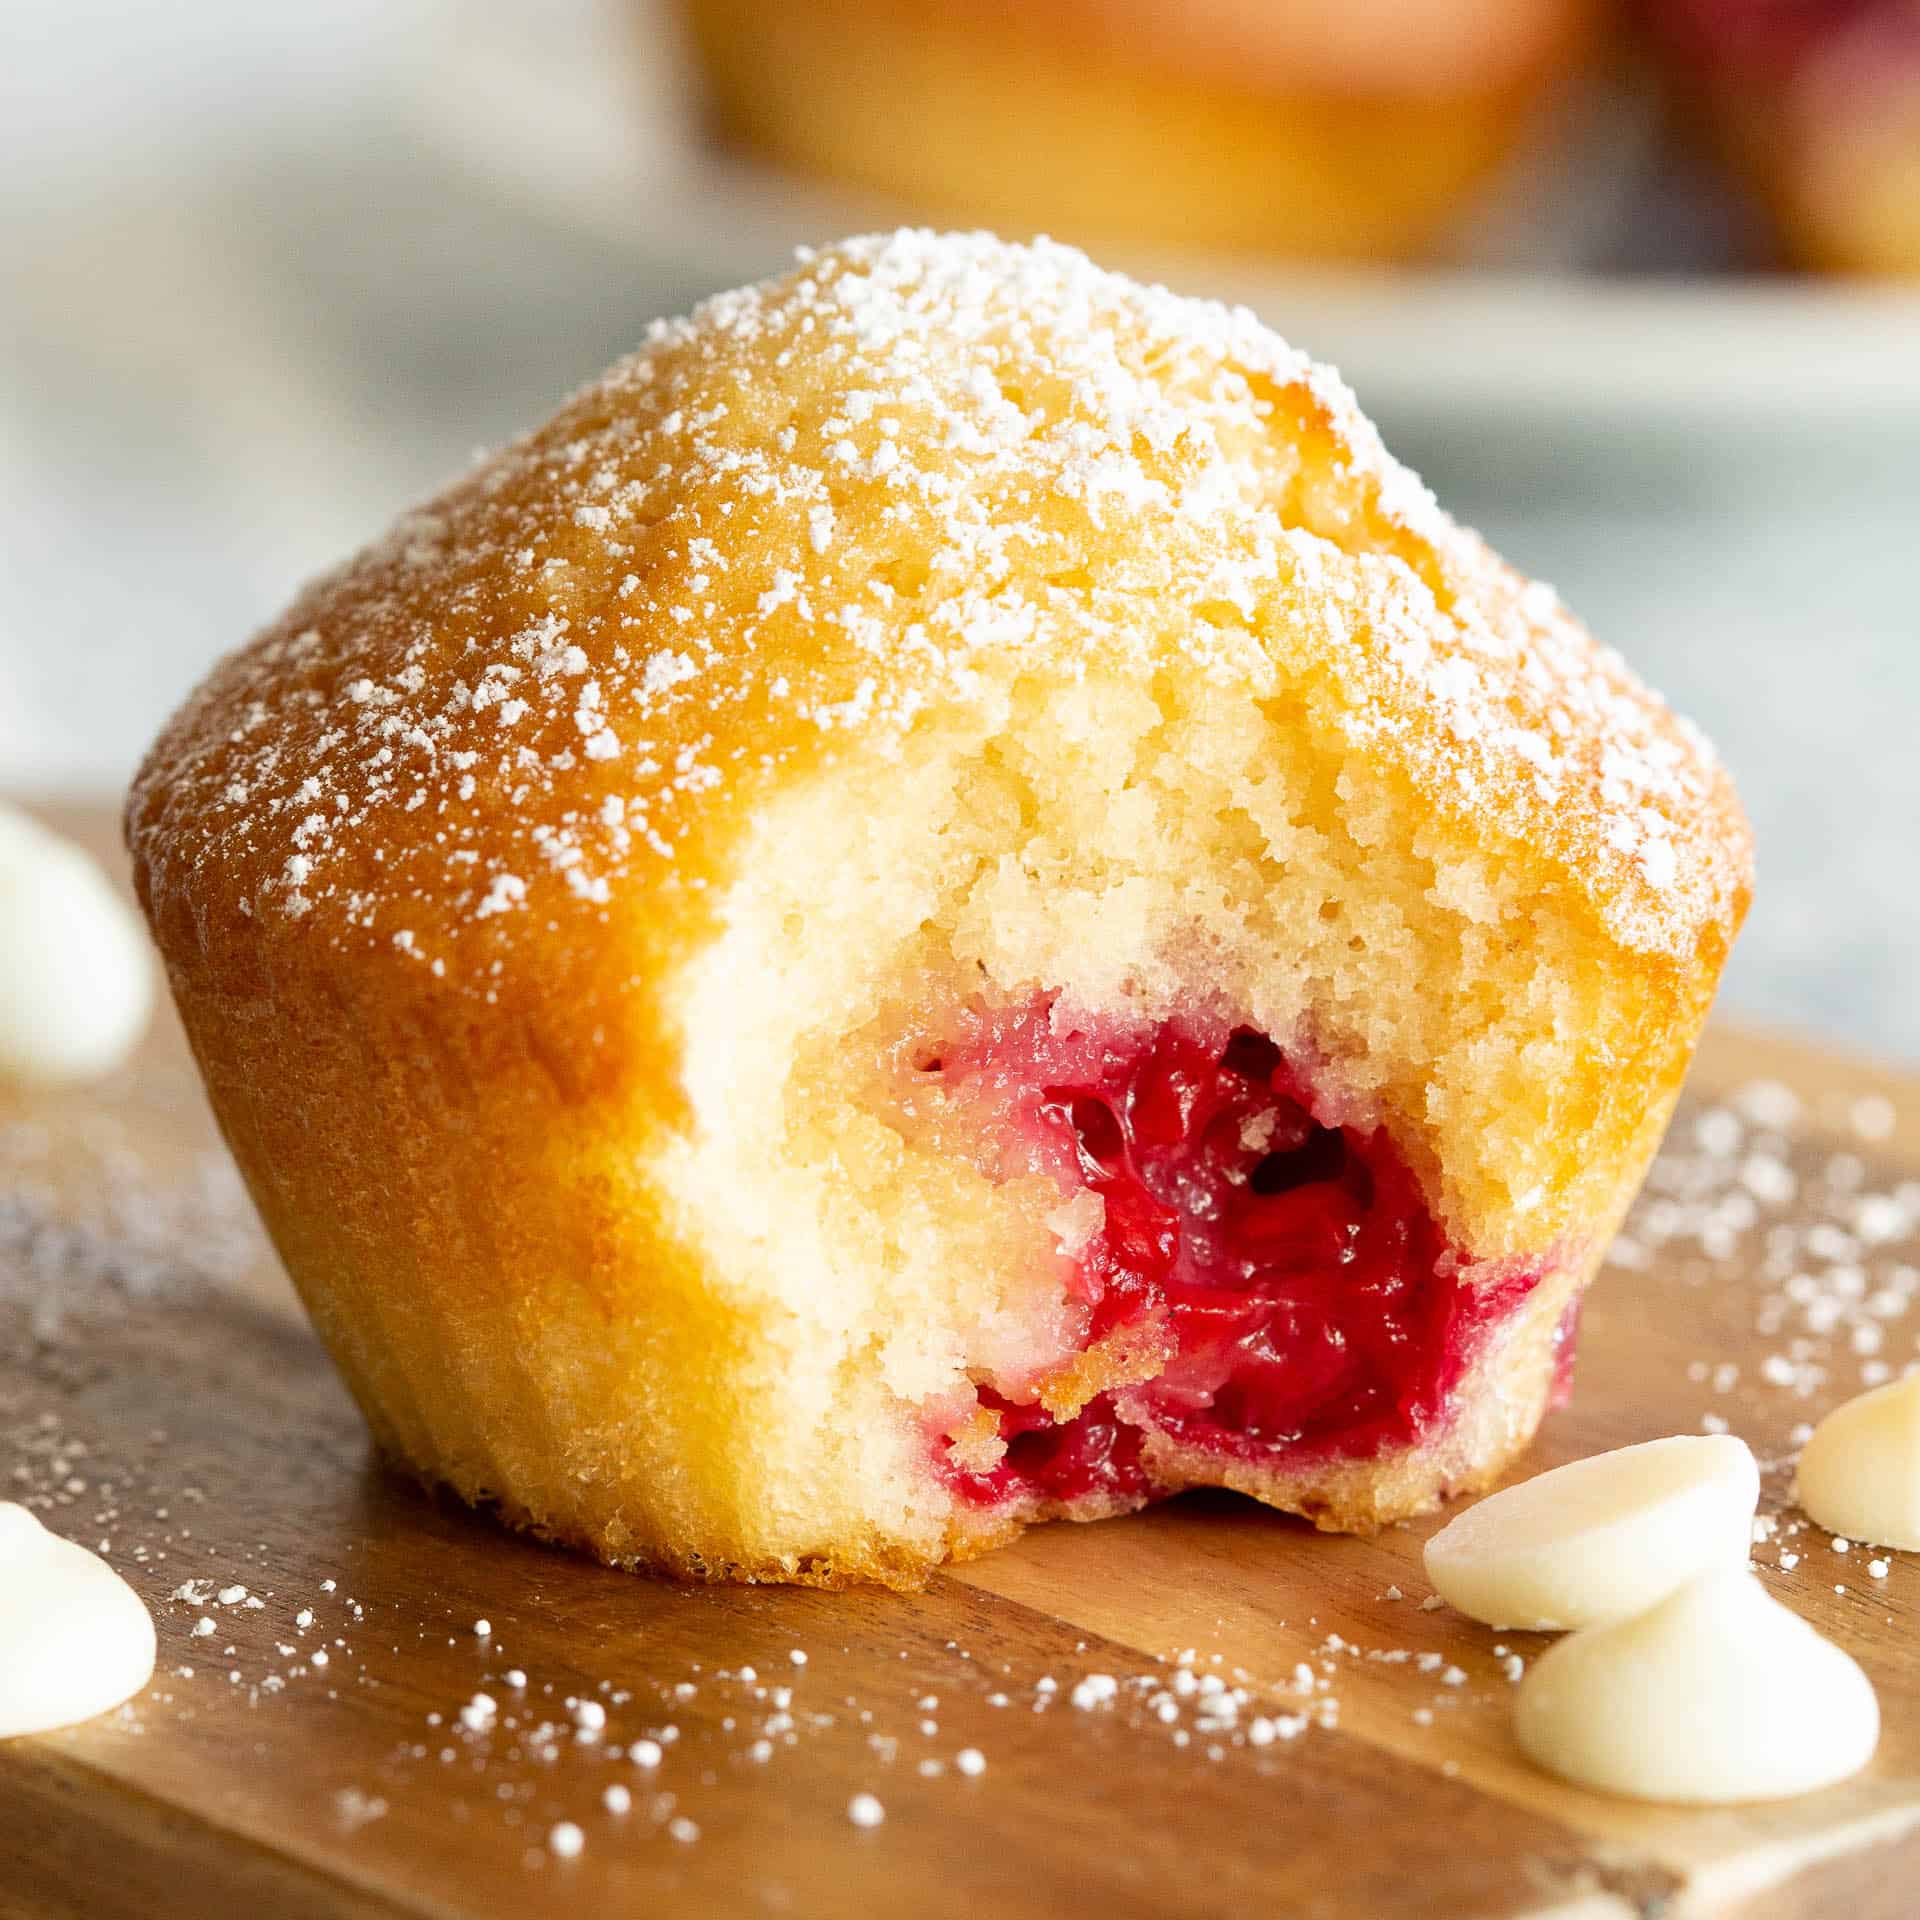 A raspberry muffin with a large bite taken out.